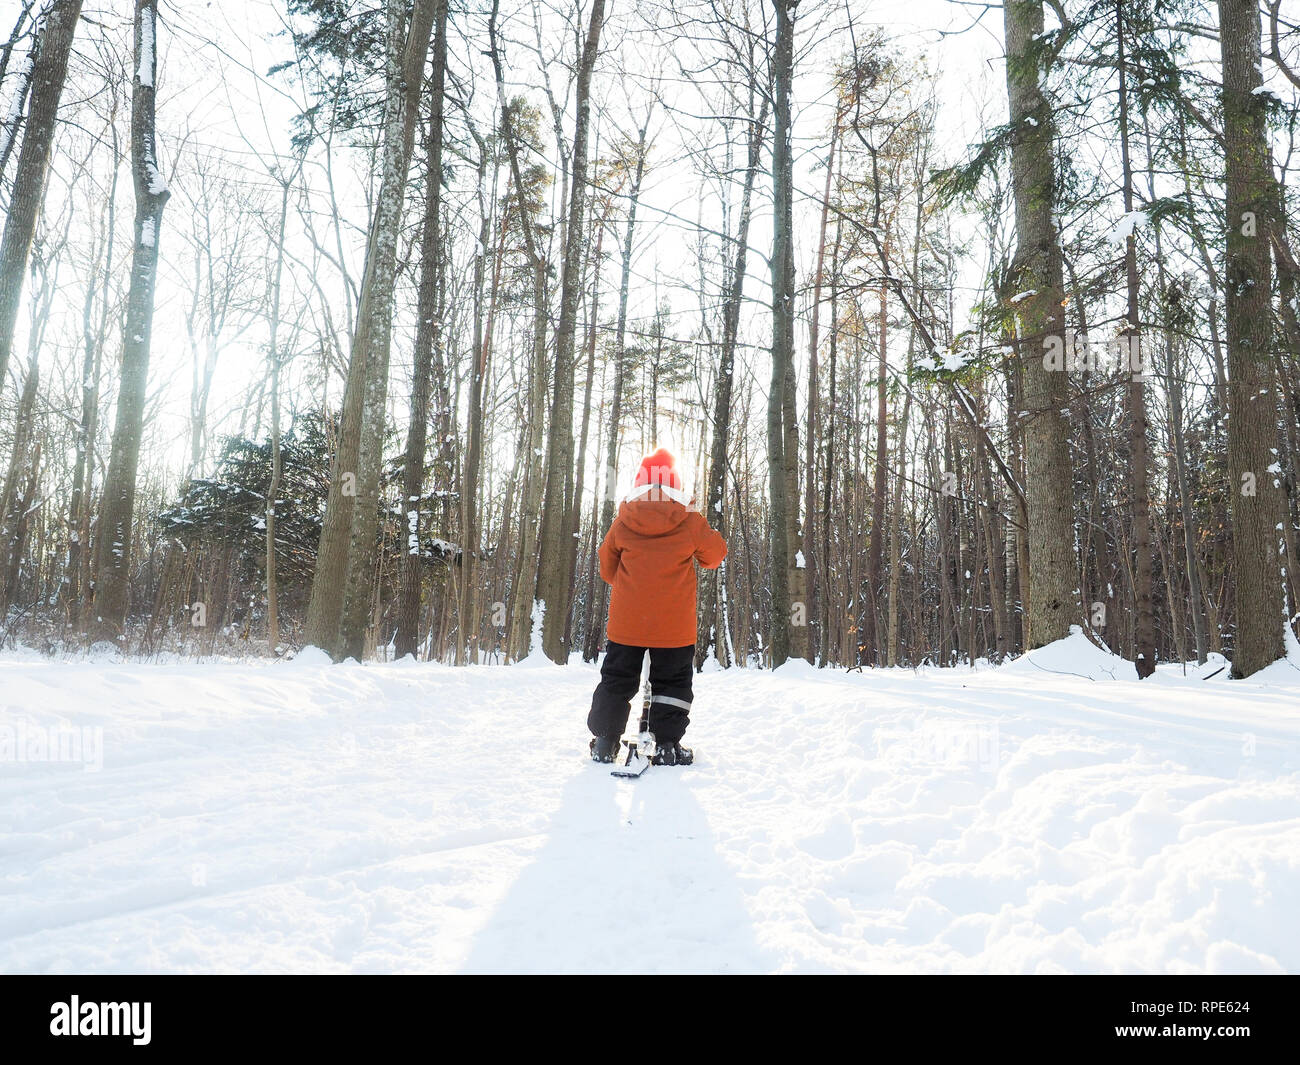 Young boy in orange and black wear on a snow kicker in forest without leaves at winter in Norway Stock Photo